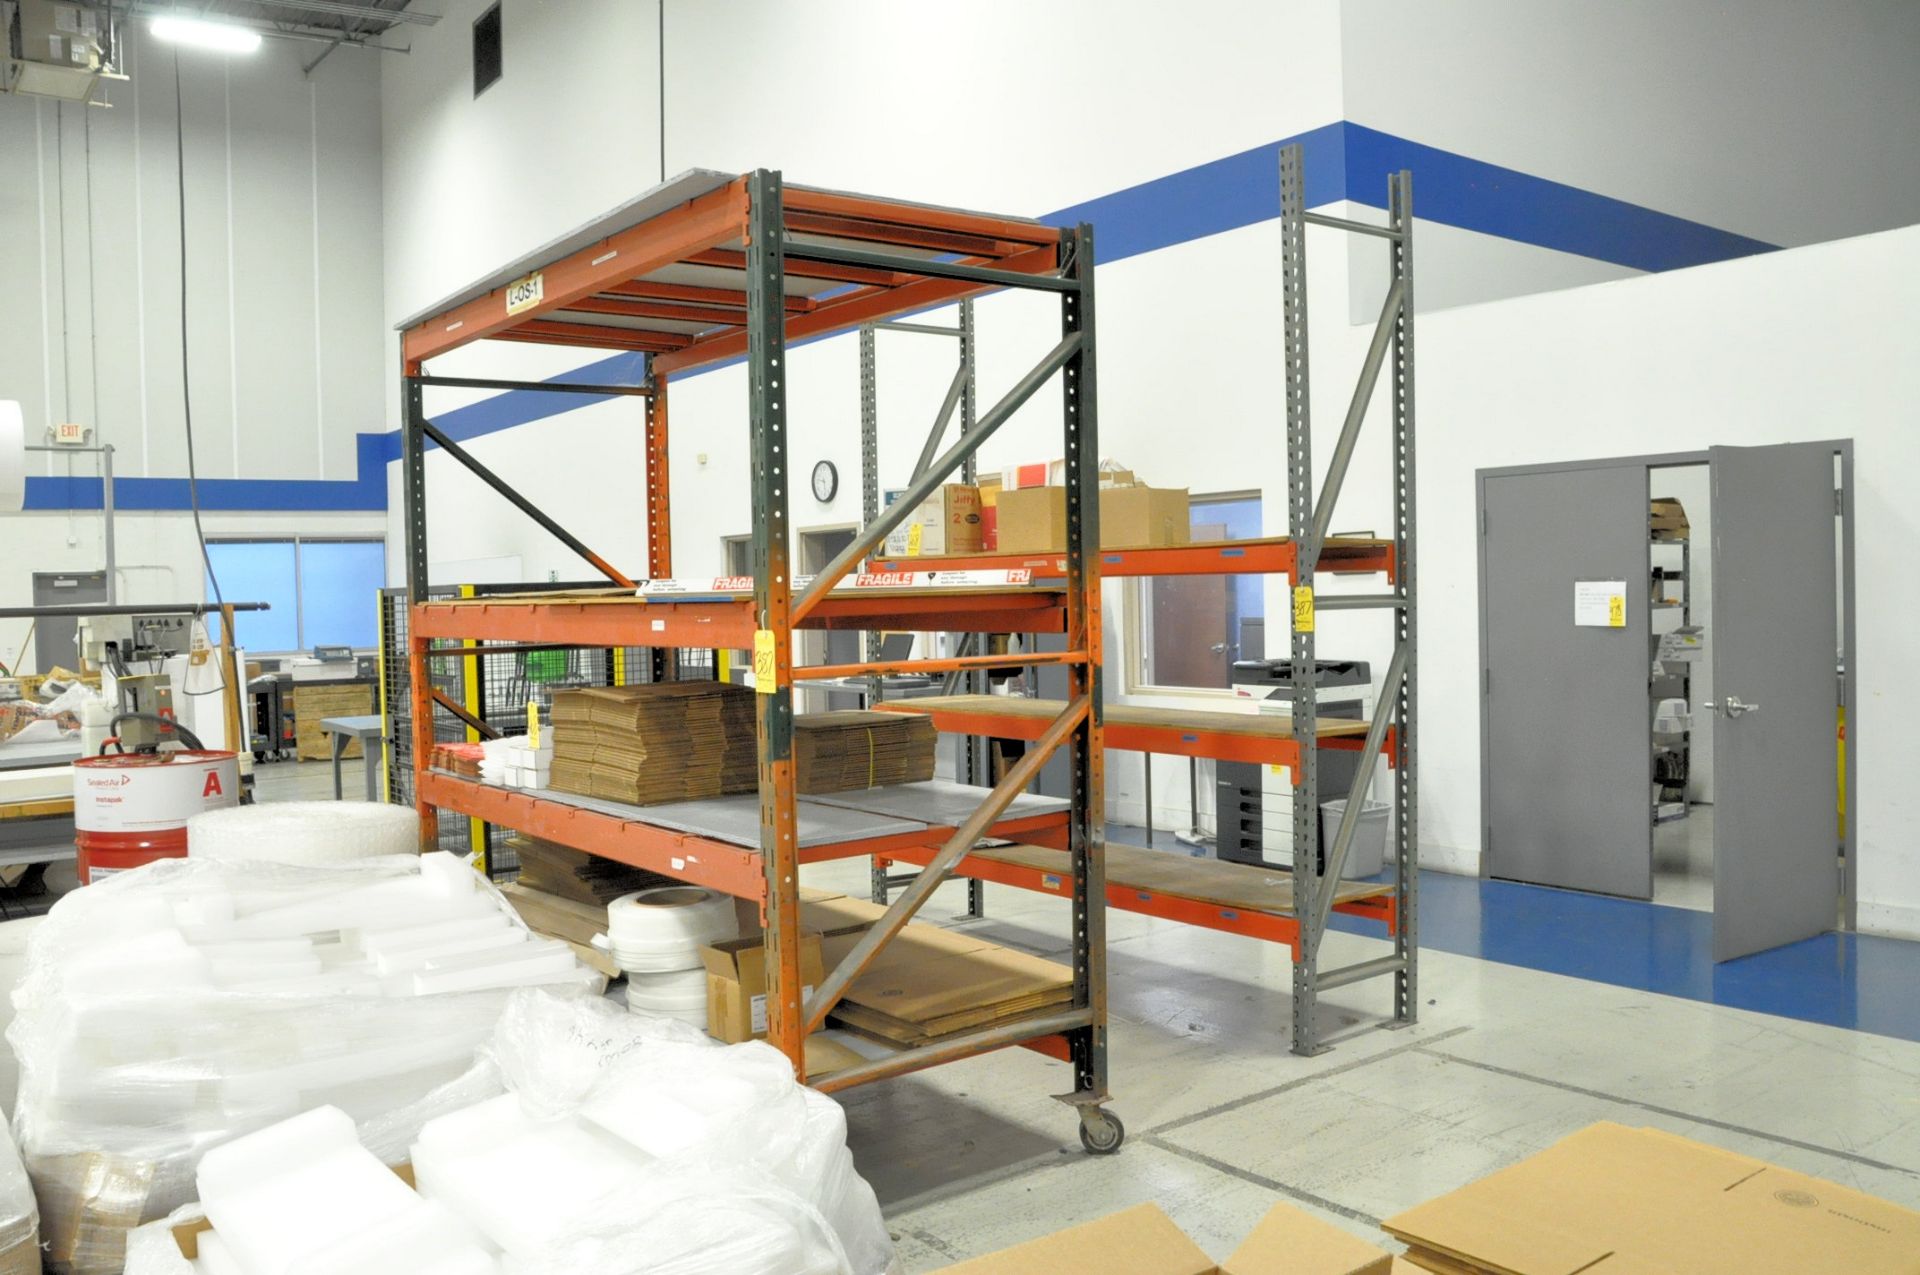 Lot-(1) Section 96"W x 102"H x 42"D Portable Pallet Racking and (1) Section 96"W x 120"H x 24"D